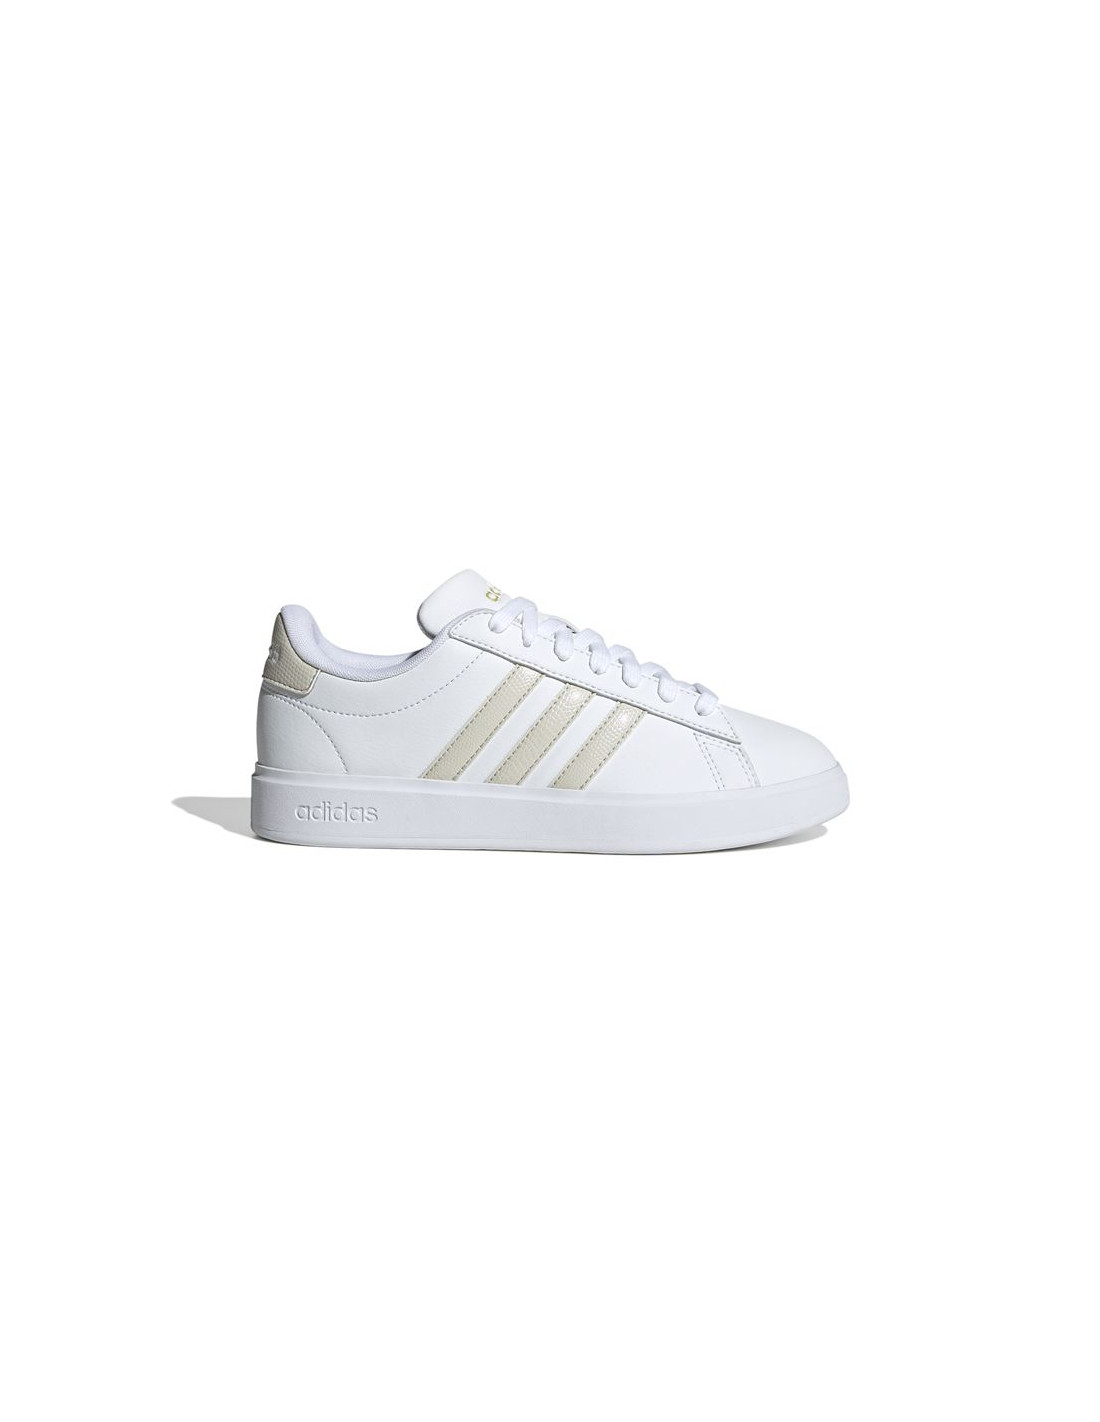 Zapatillas adidas grand court mujer wh